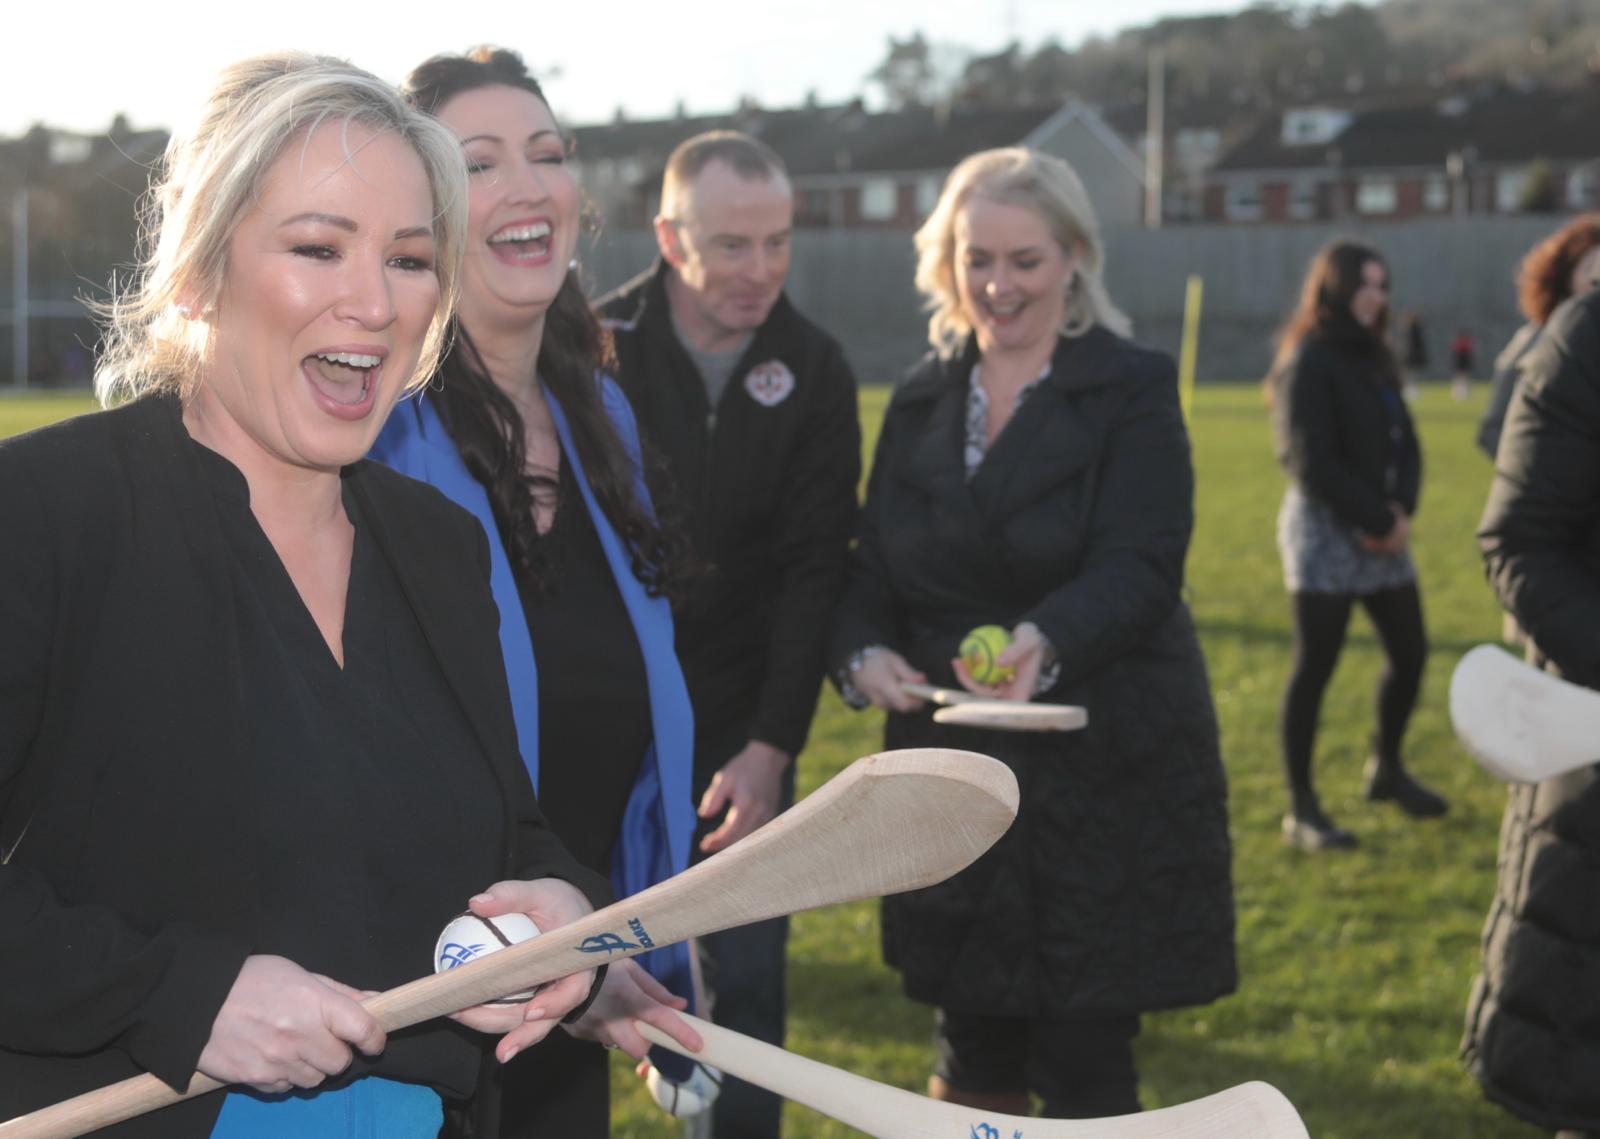 TEAMWORK: First Minister Michelle O\'Neill and deputy First Minister Emma Little-Pengelly share a joke during camogie training on Wednesday evening